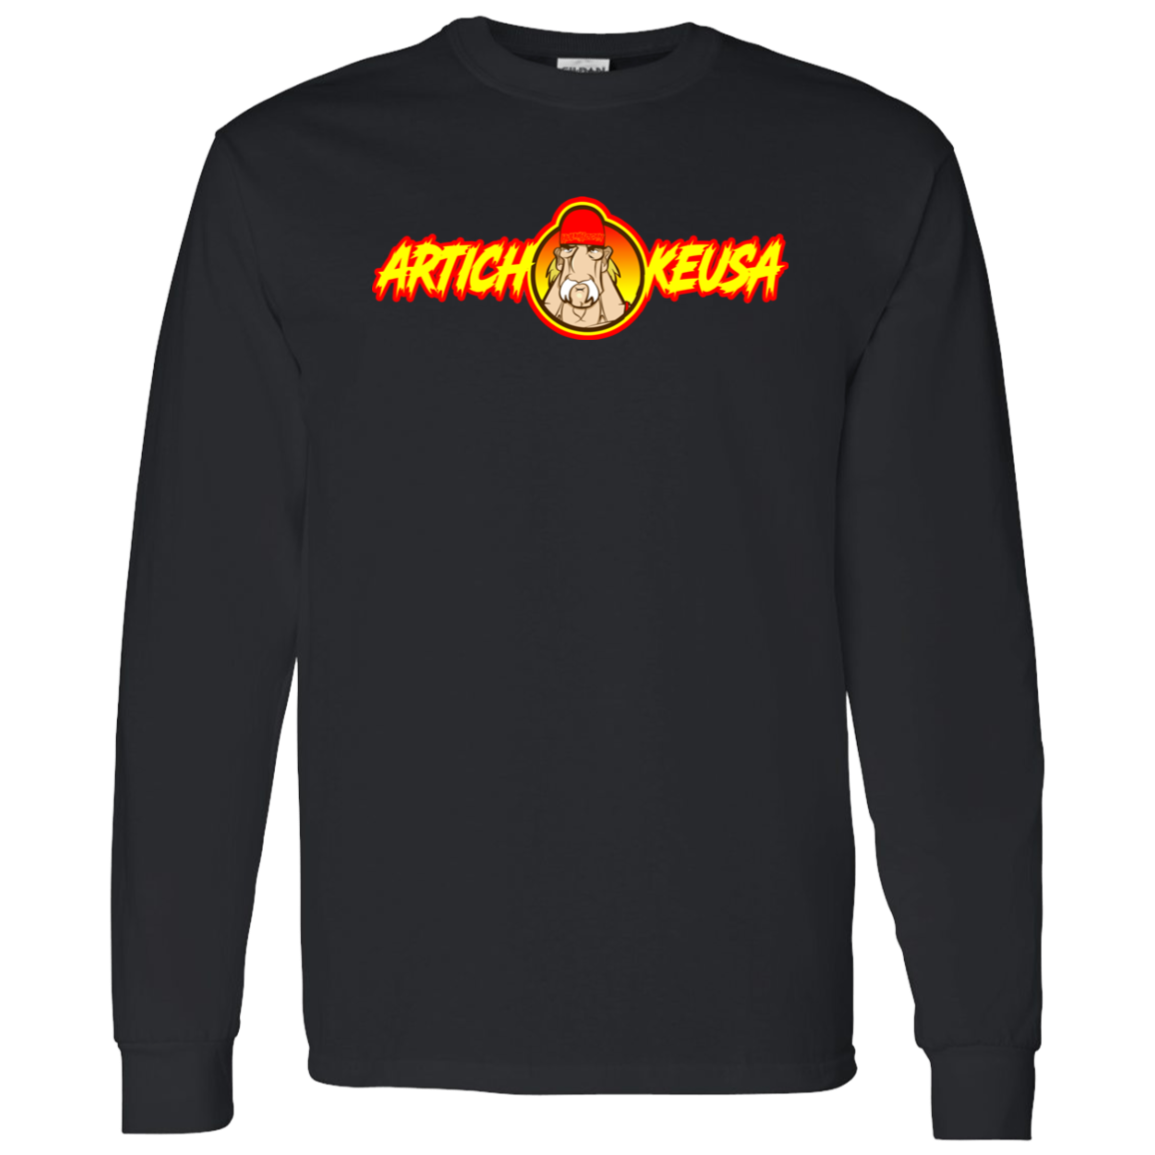 ArtichokeUSA Character and Font Design. Let’s Create Your Own Design Today. Fan Art. The Hulkster. 100 % Cotton LS T-Shirt